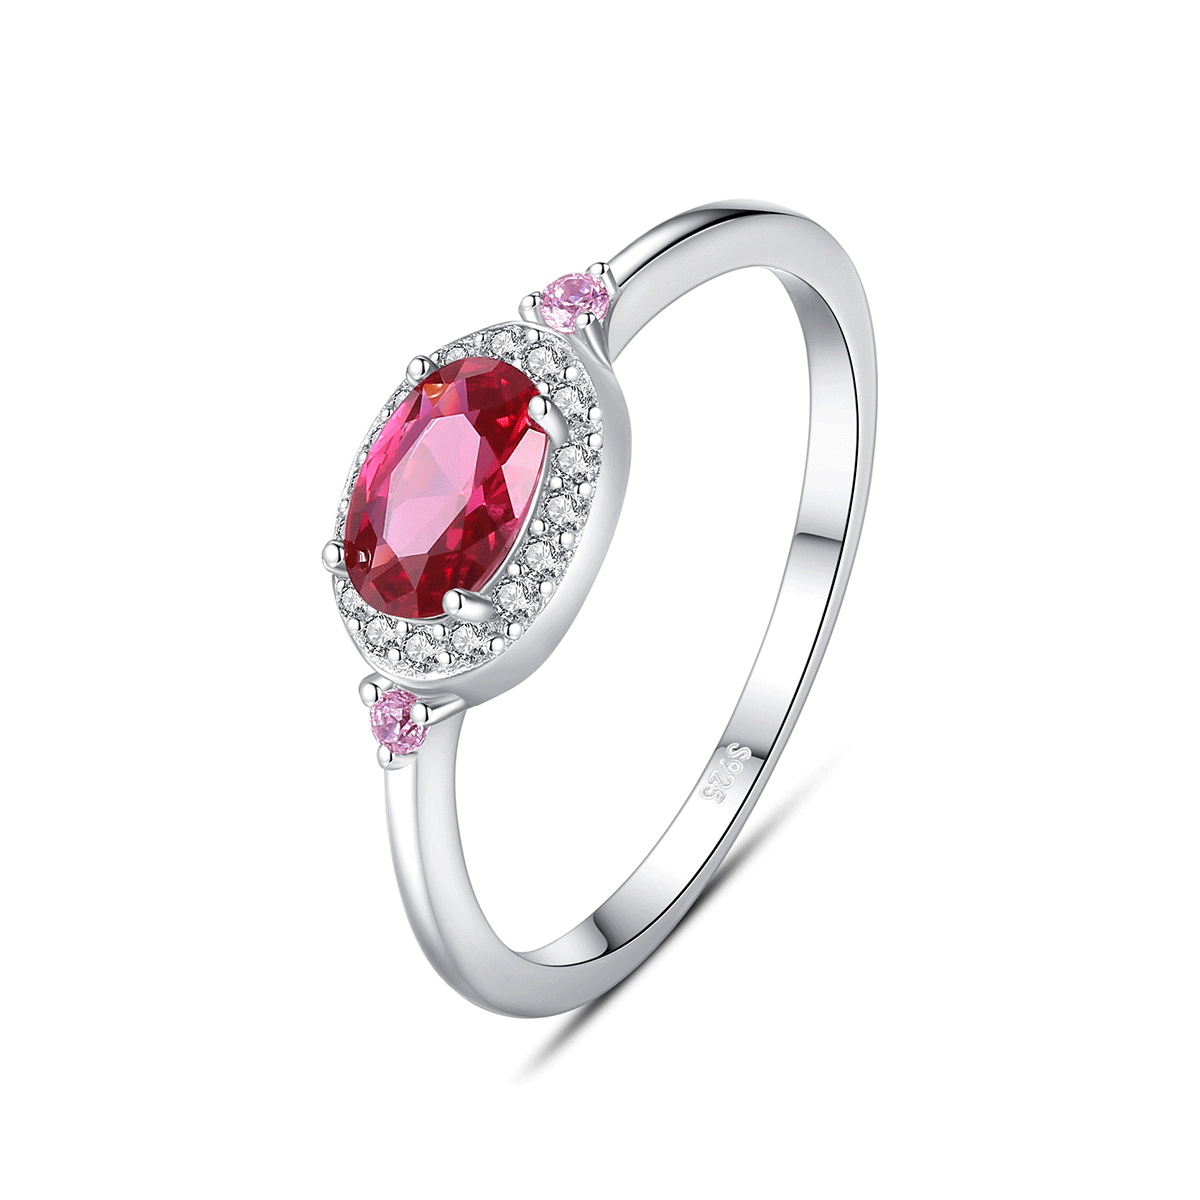 Cz Vintage Red Ruby Sterling Silver Rings